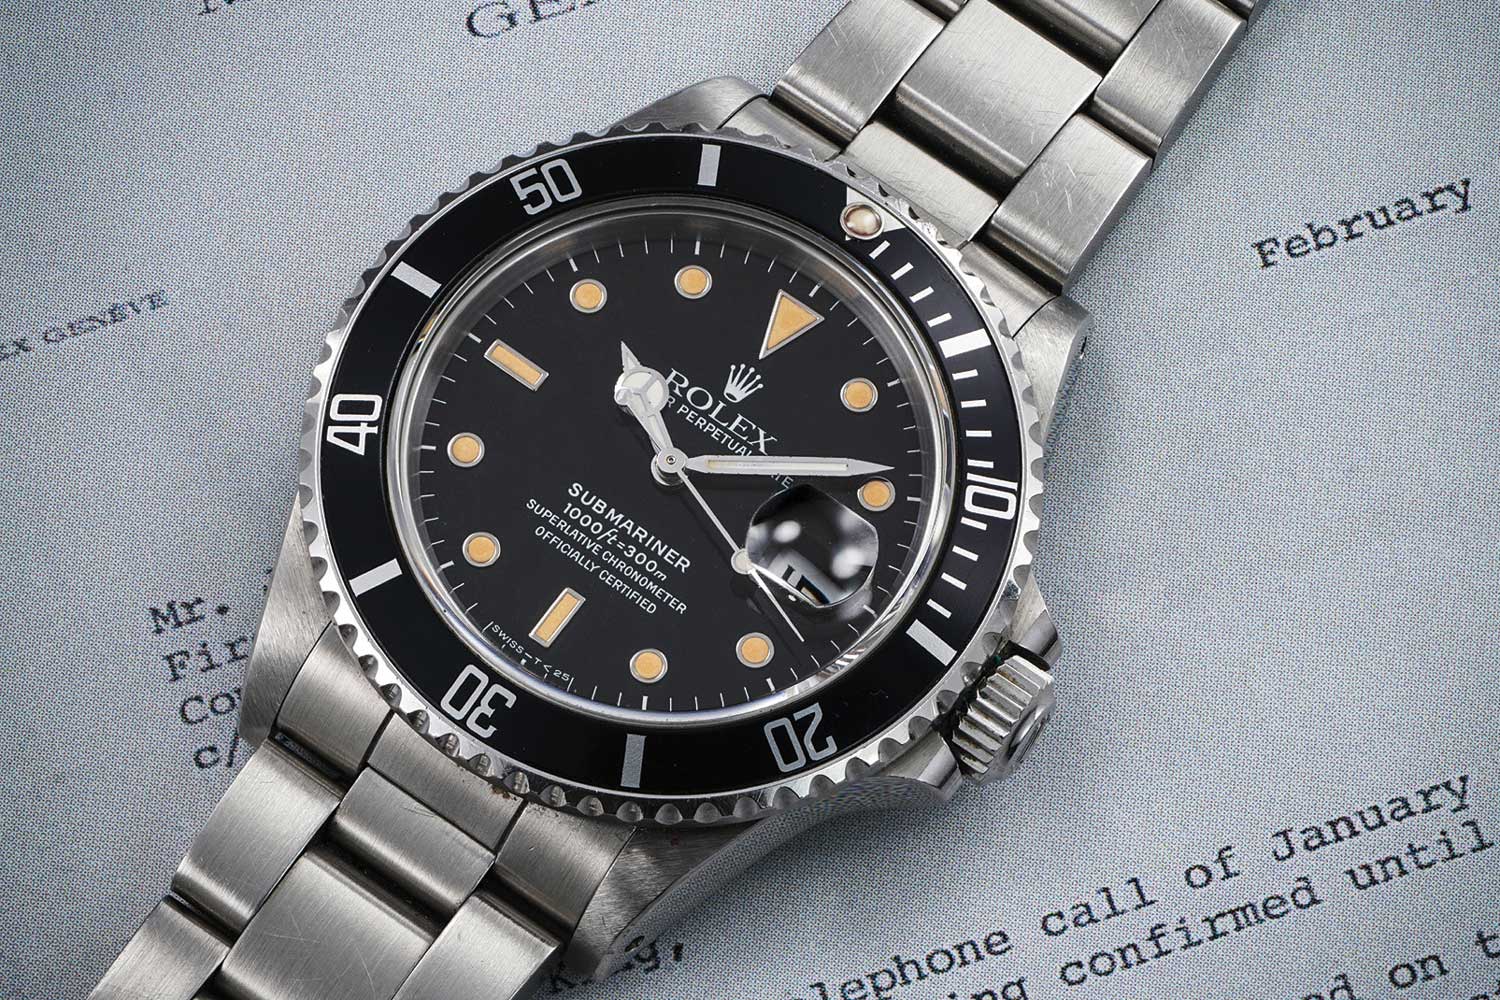 The ref. 168000 was produced for a matter of months in 1988 before the introduction of reference 16610 (image: Phillips)